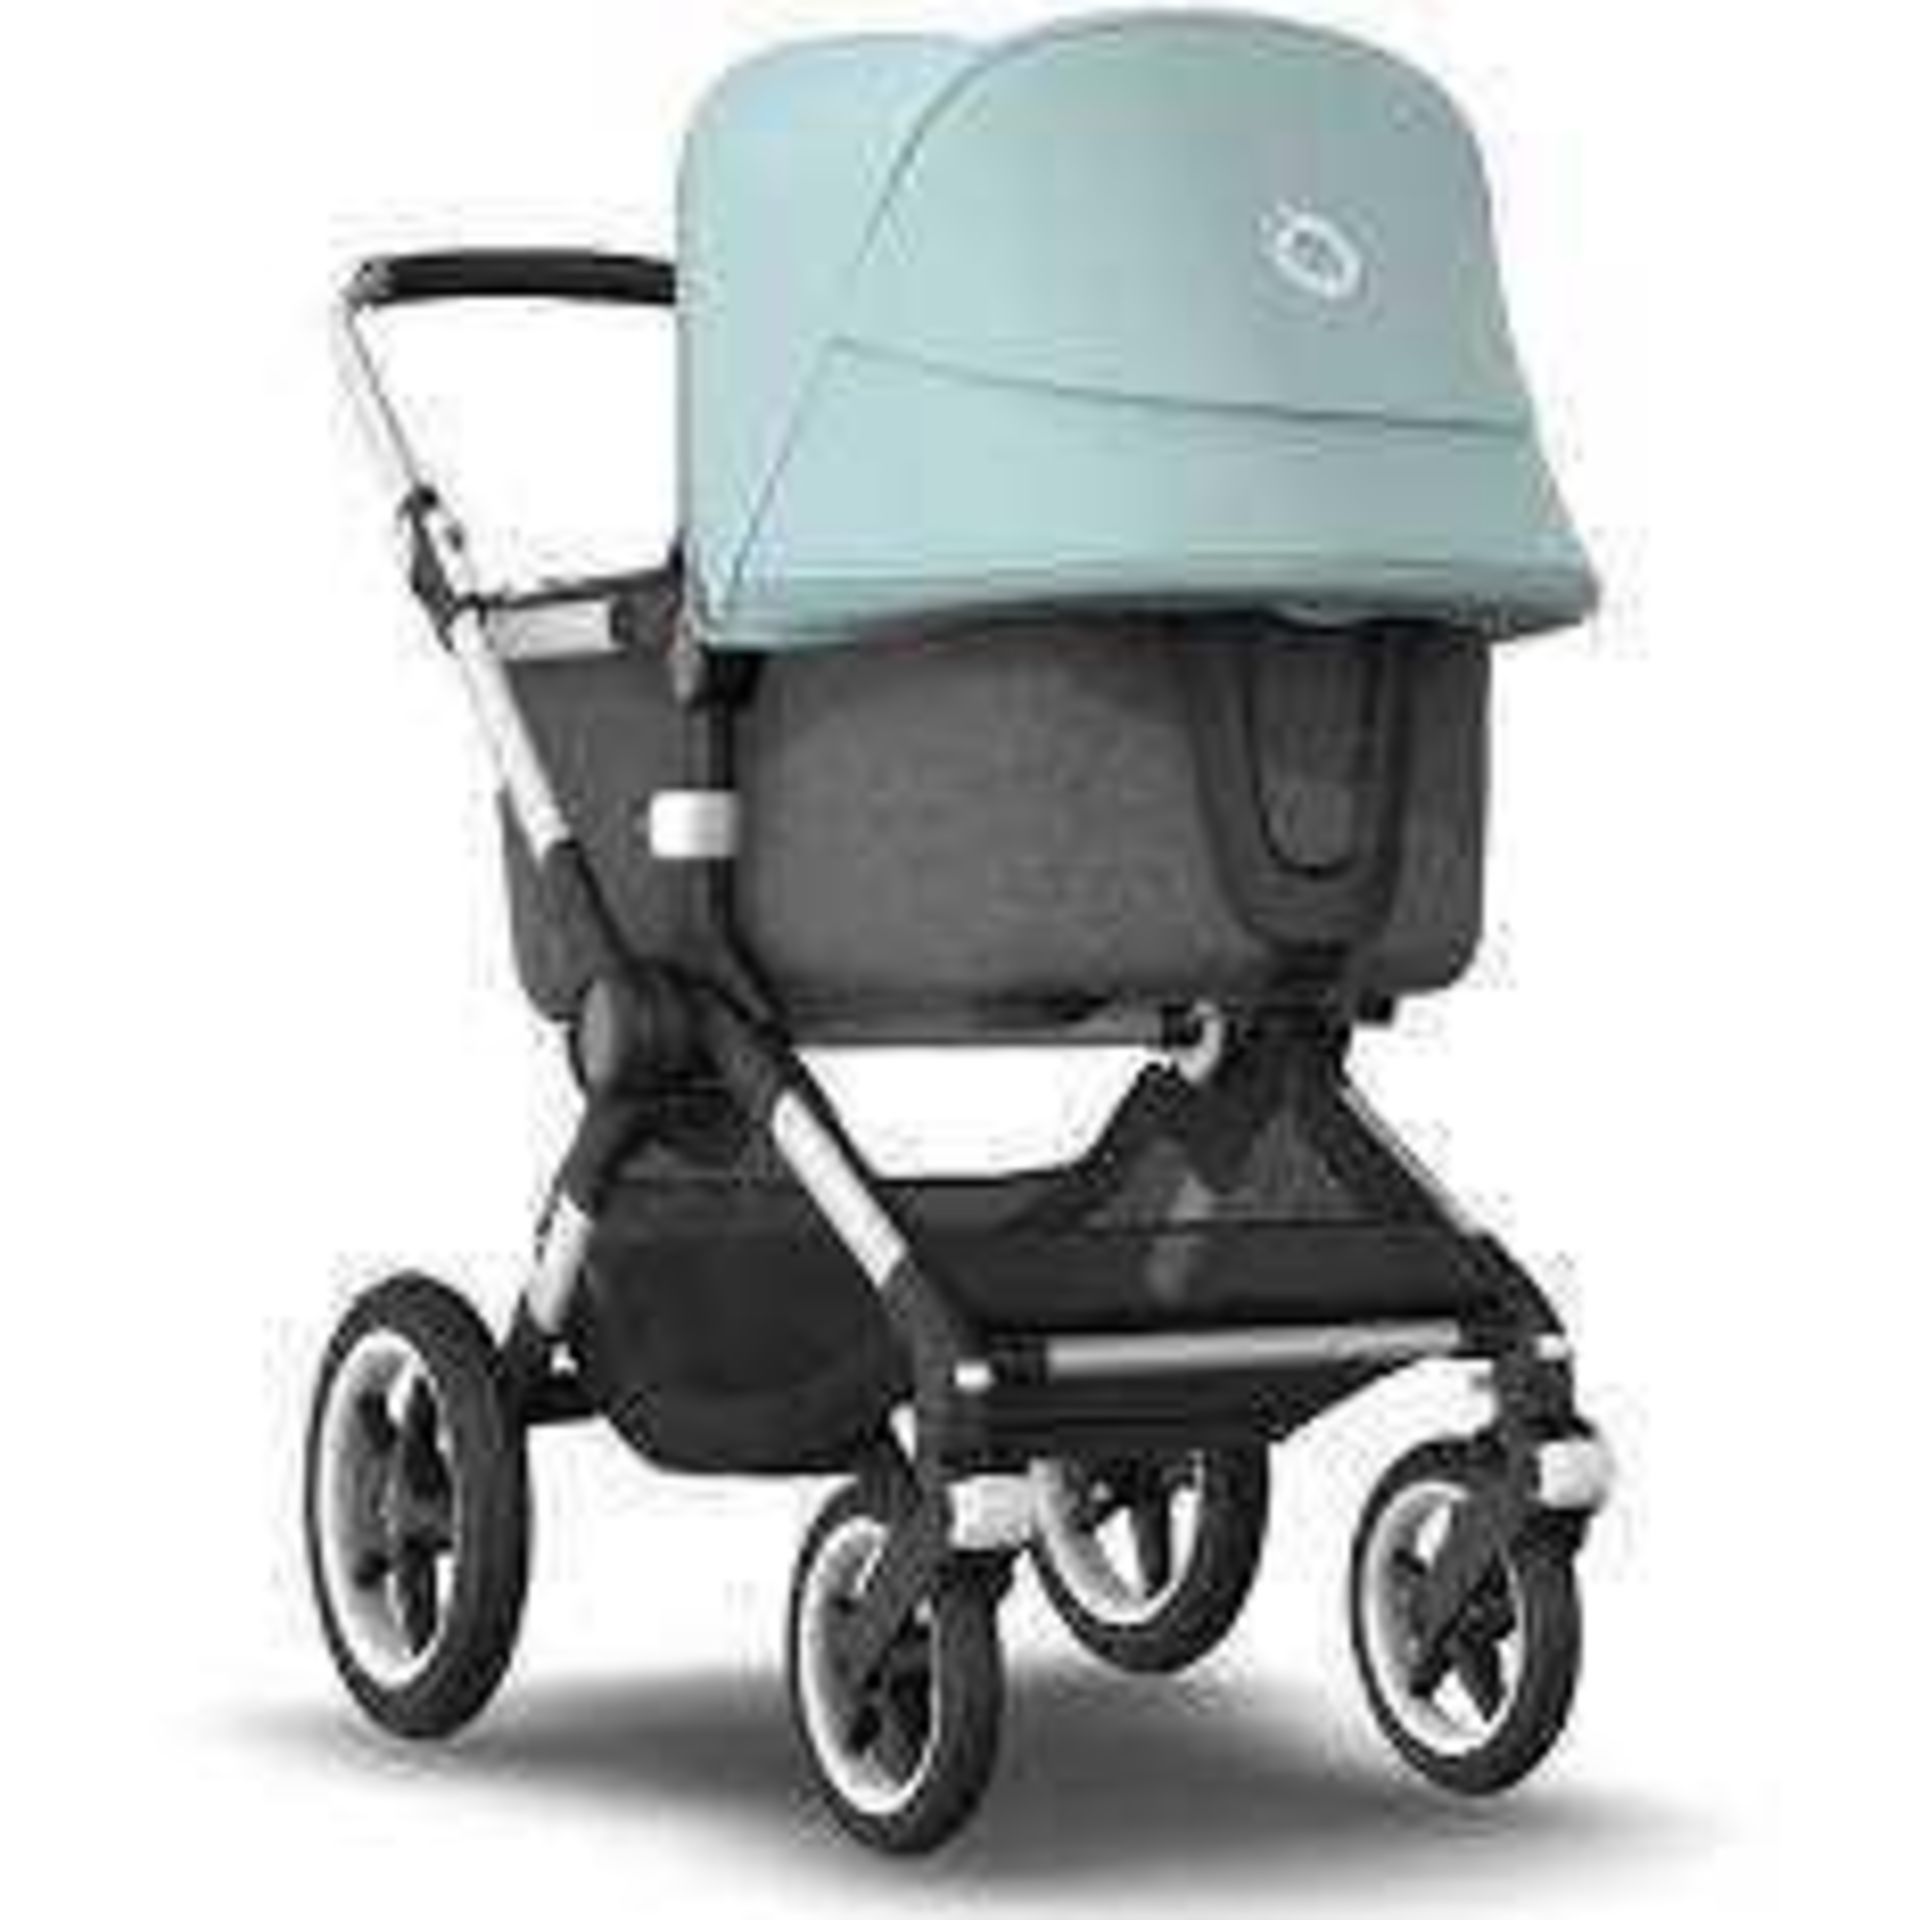 RRP £150 Boxed Your Baby Dakota 2In1 Baby Stroller Set (Appraisals Available On Request) (Pictures